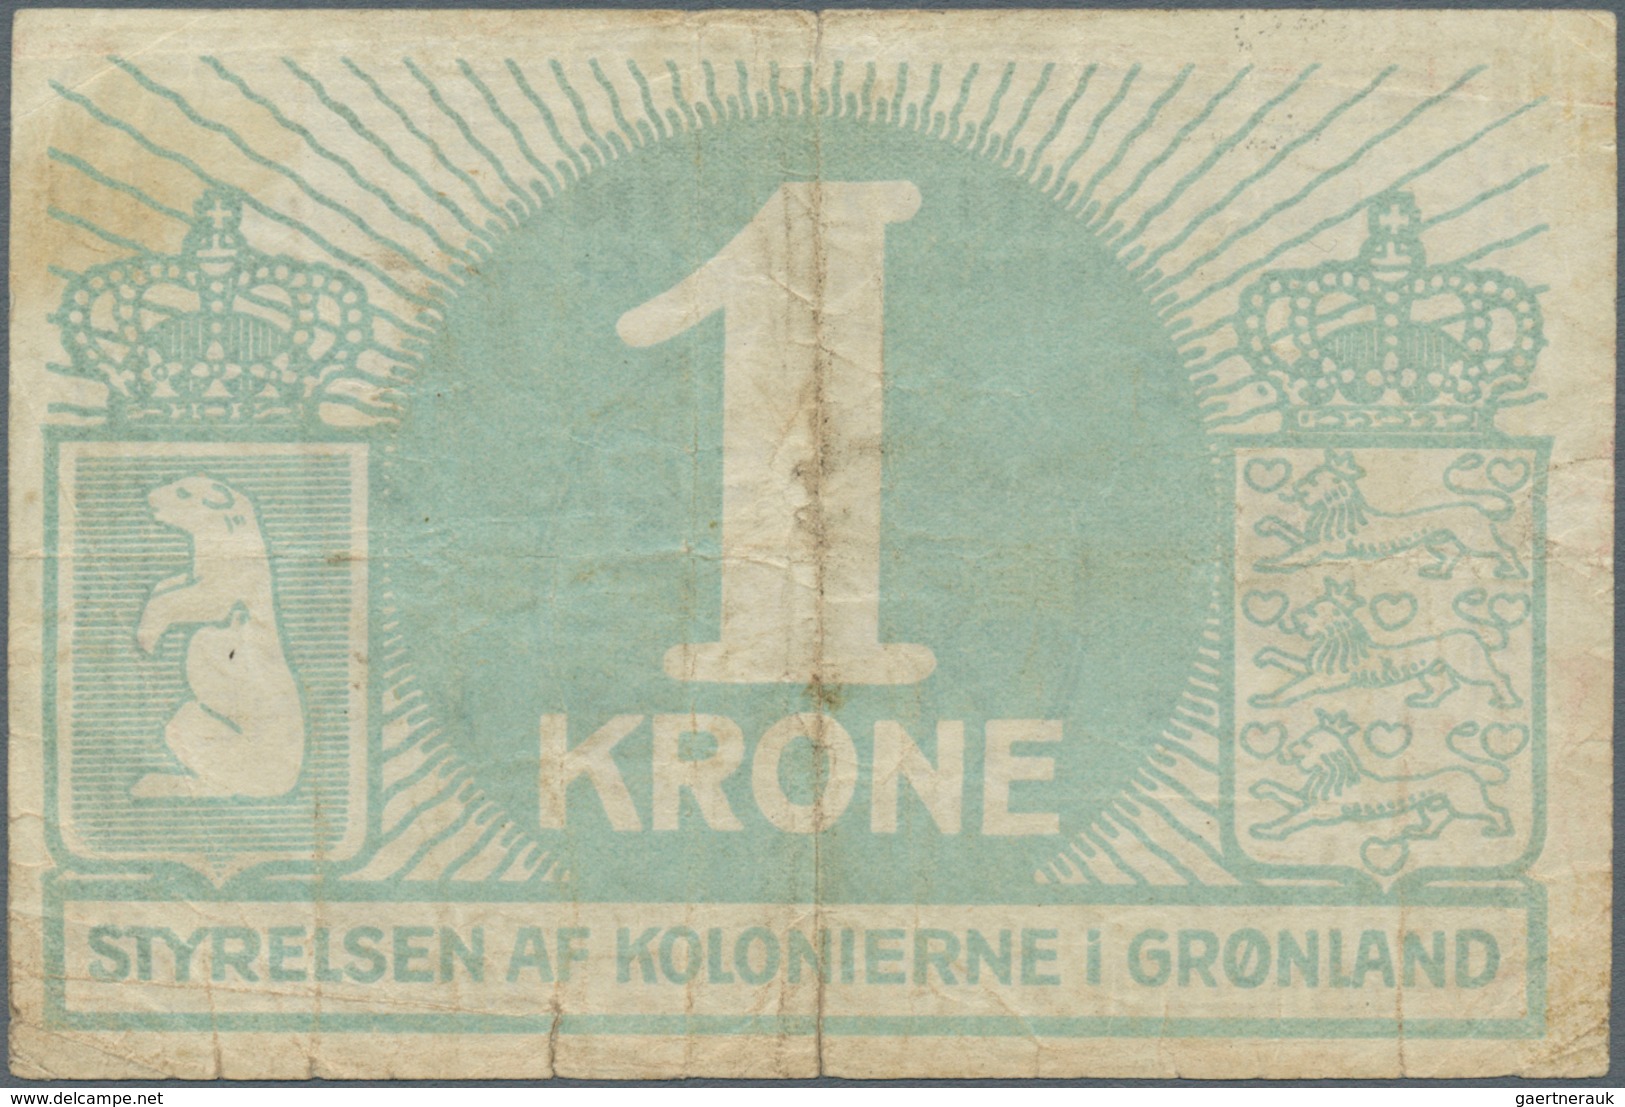 01651 Greenland / Grönland: 1 Krone ND(1913) P. 13, Used With Folds And Creases, Border Tears, No Repairs, - Groenlandia